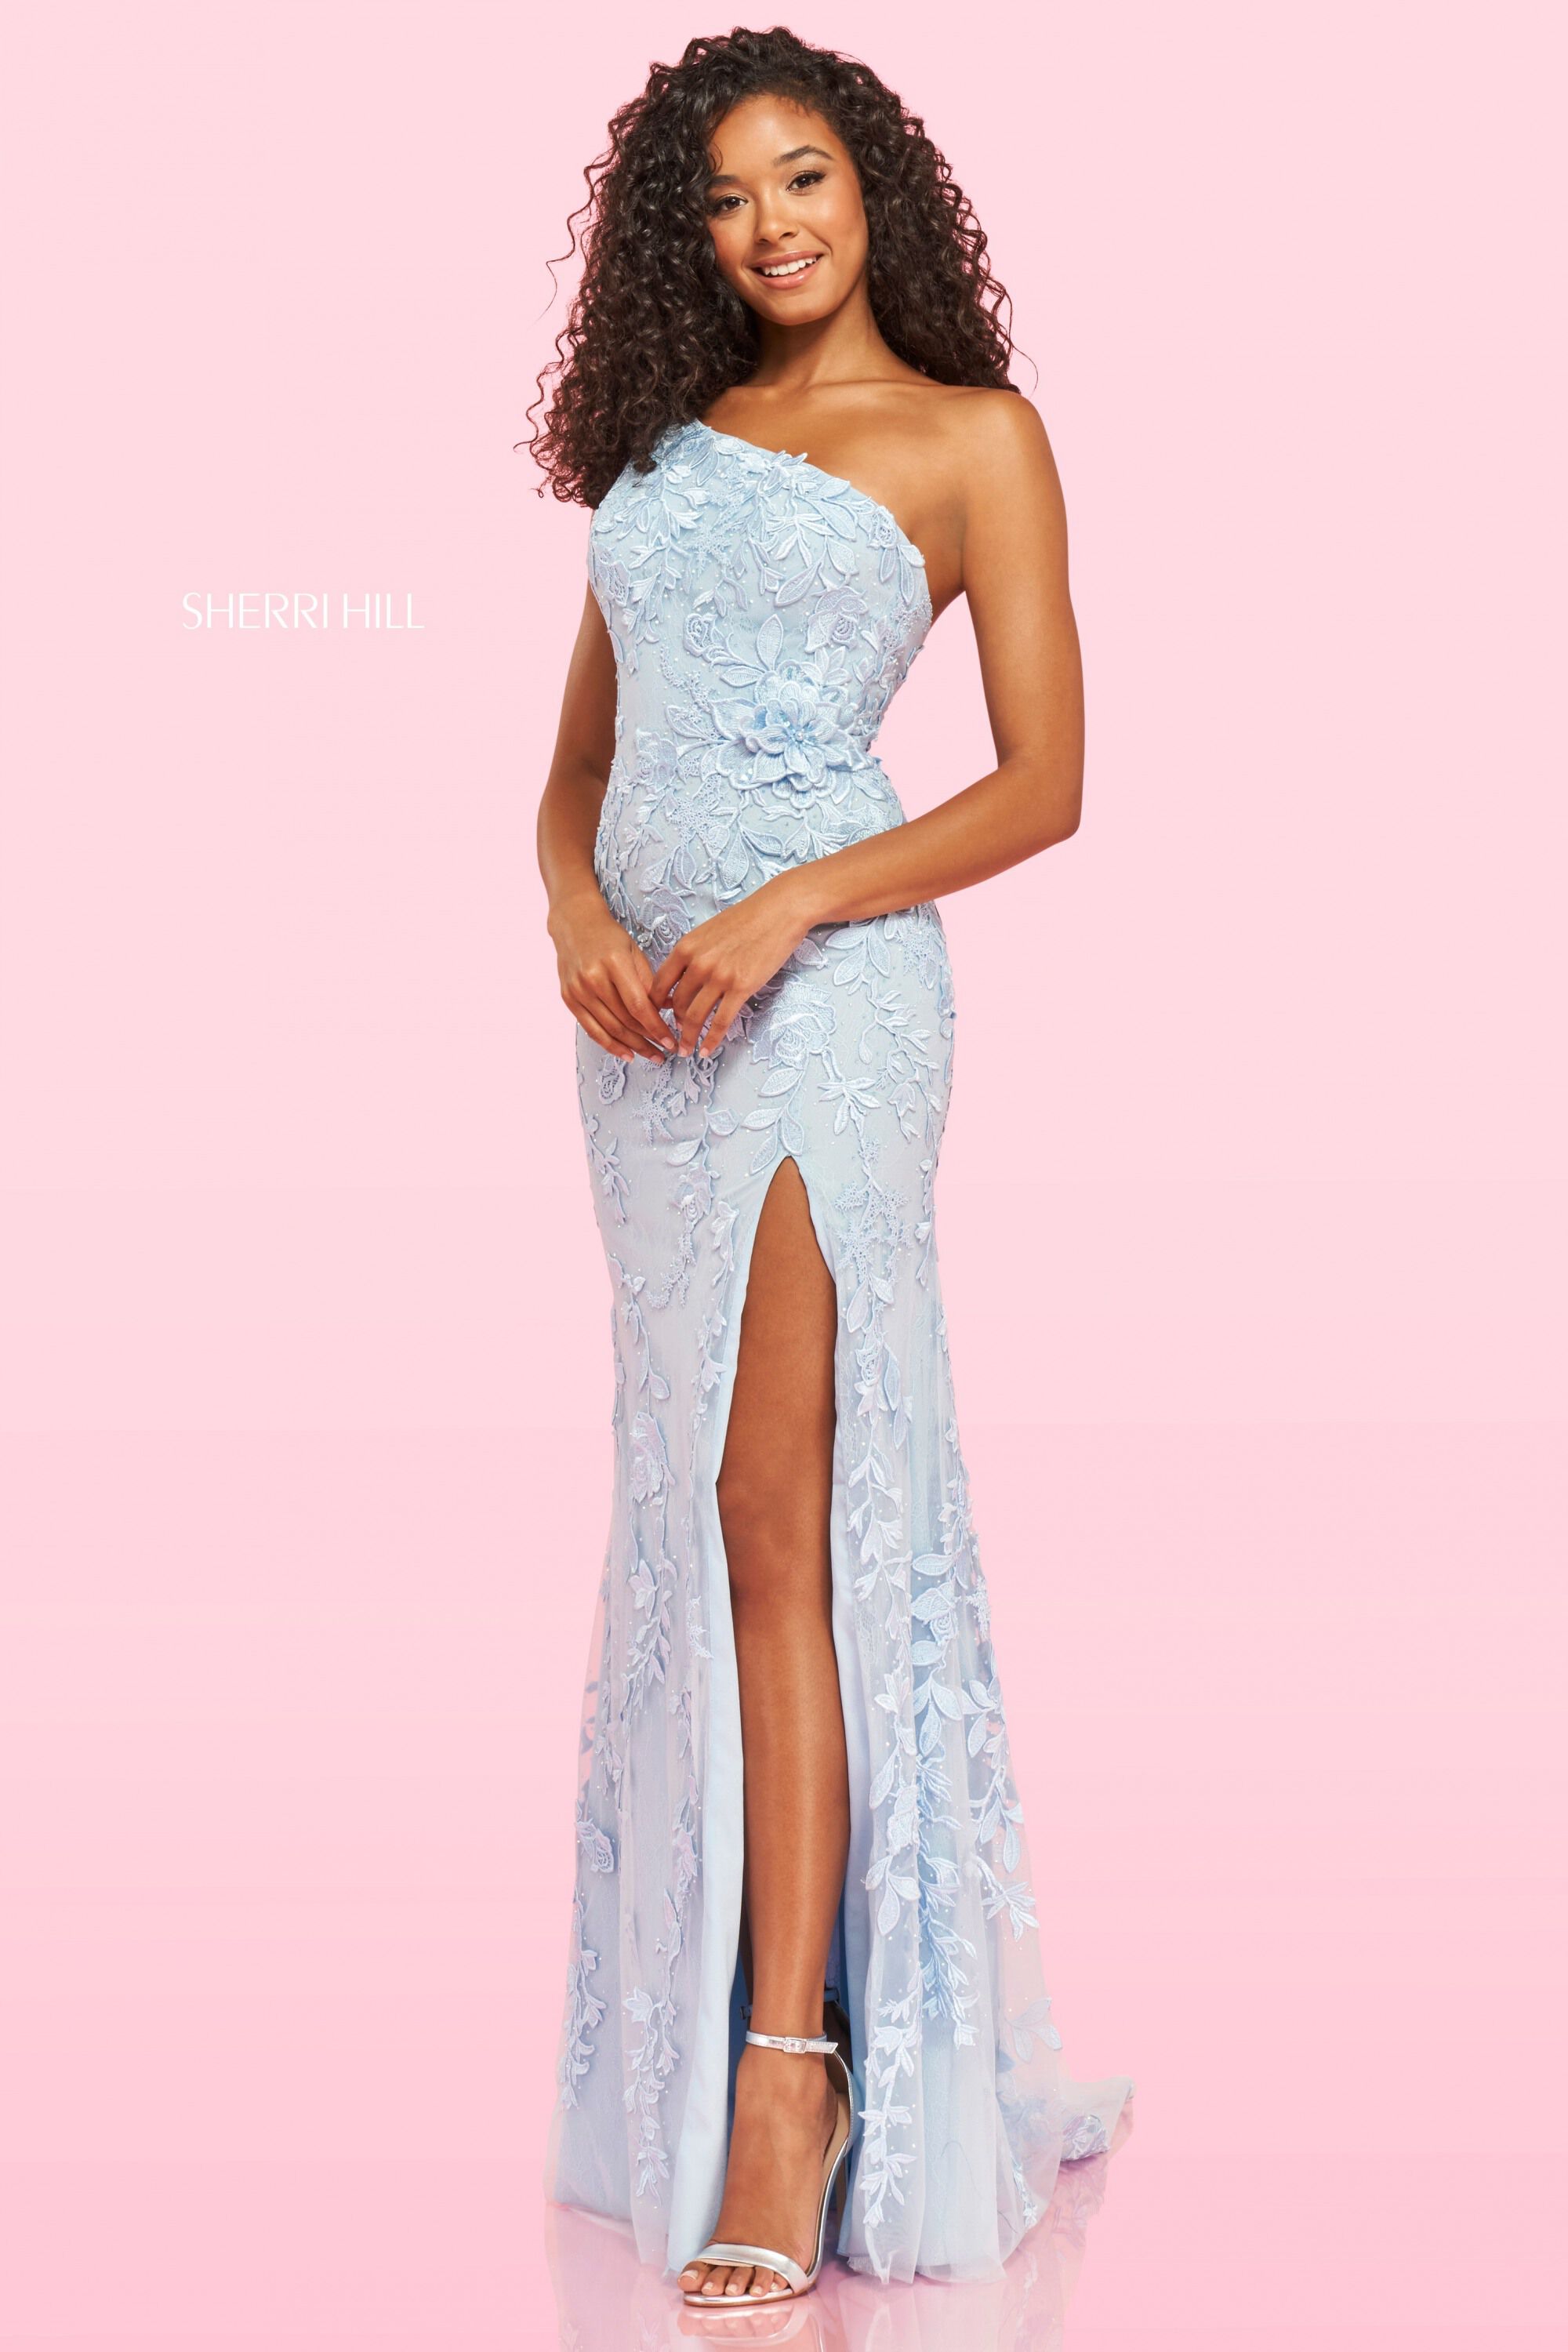 style № 54262 designed by SherriHill